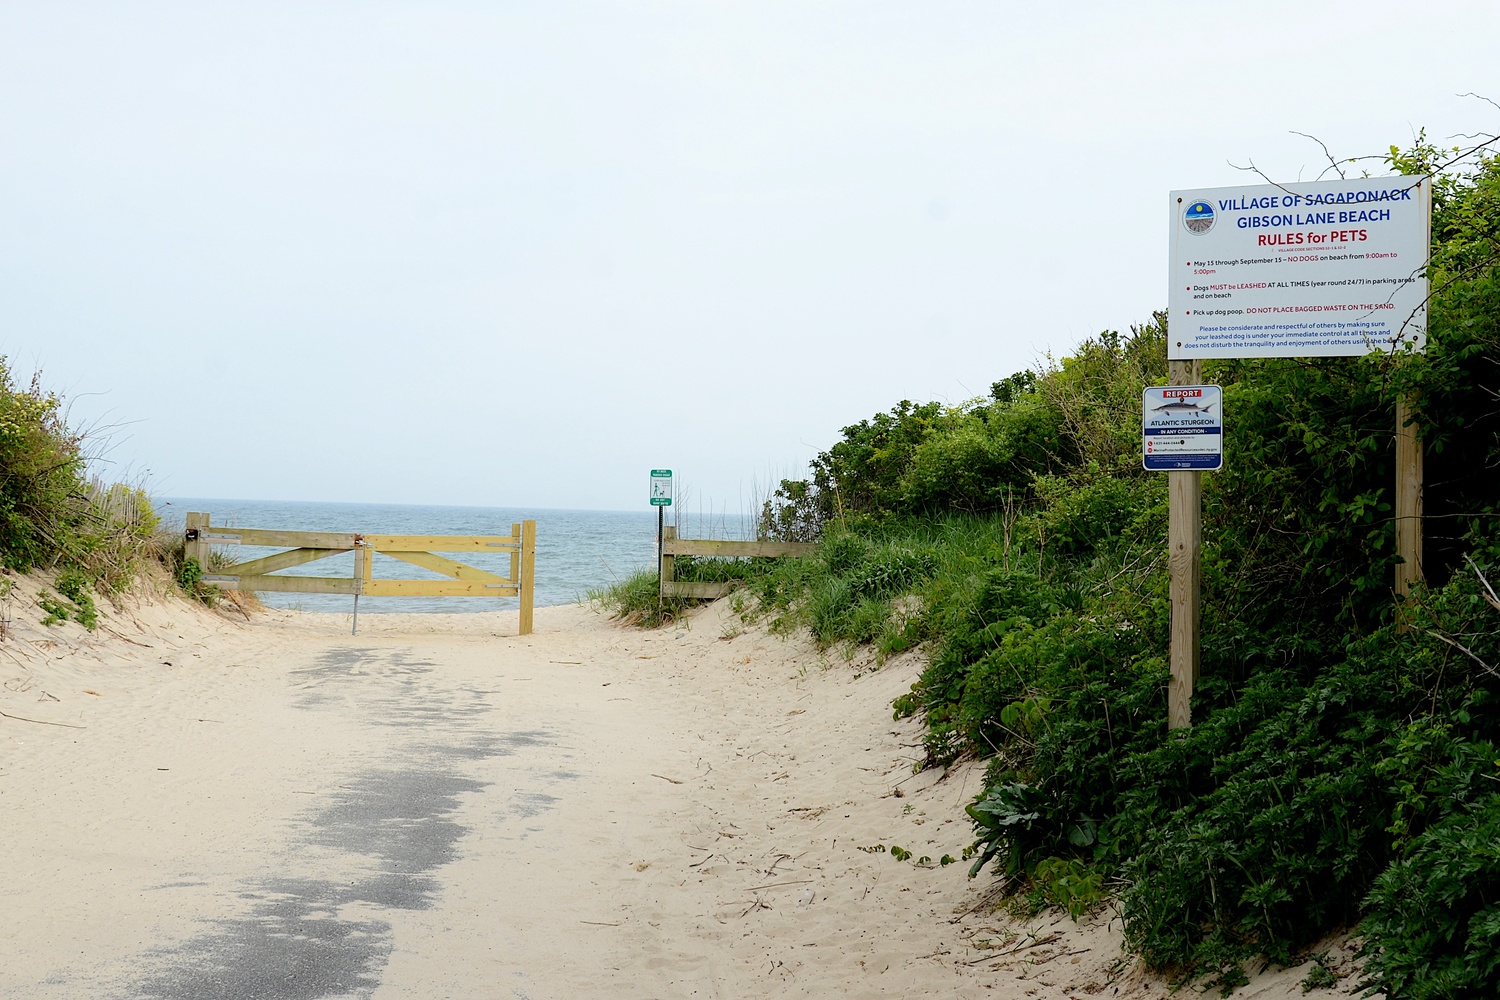 Sagaponack Village residents debated the possibility of banning dogs at Gibson Beach during the summer months, with many residents speaking out against that idea at a public hearing on May 10. KYRIL BROMLEY